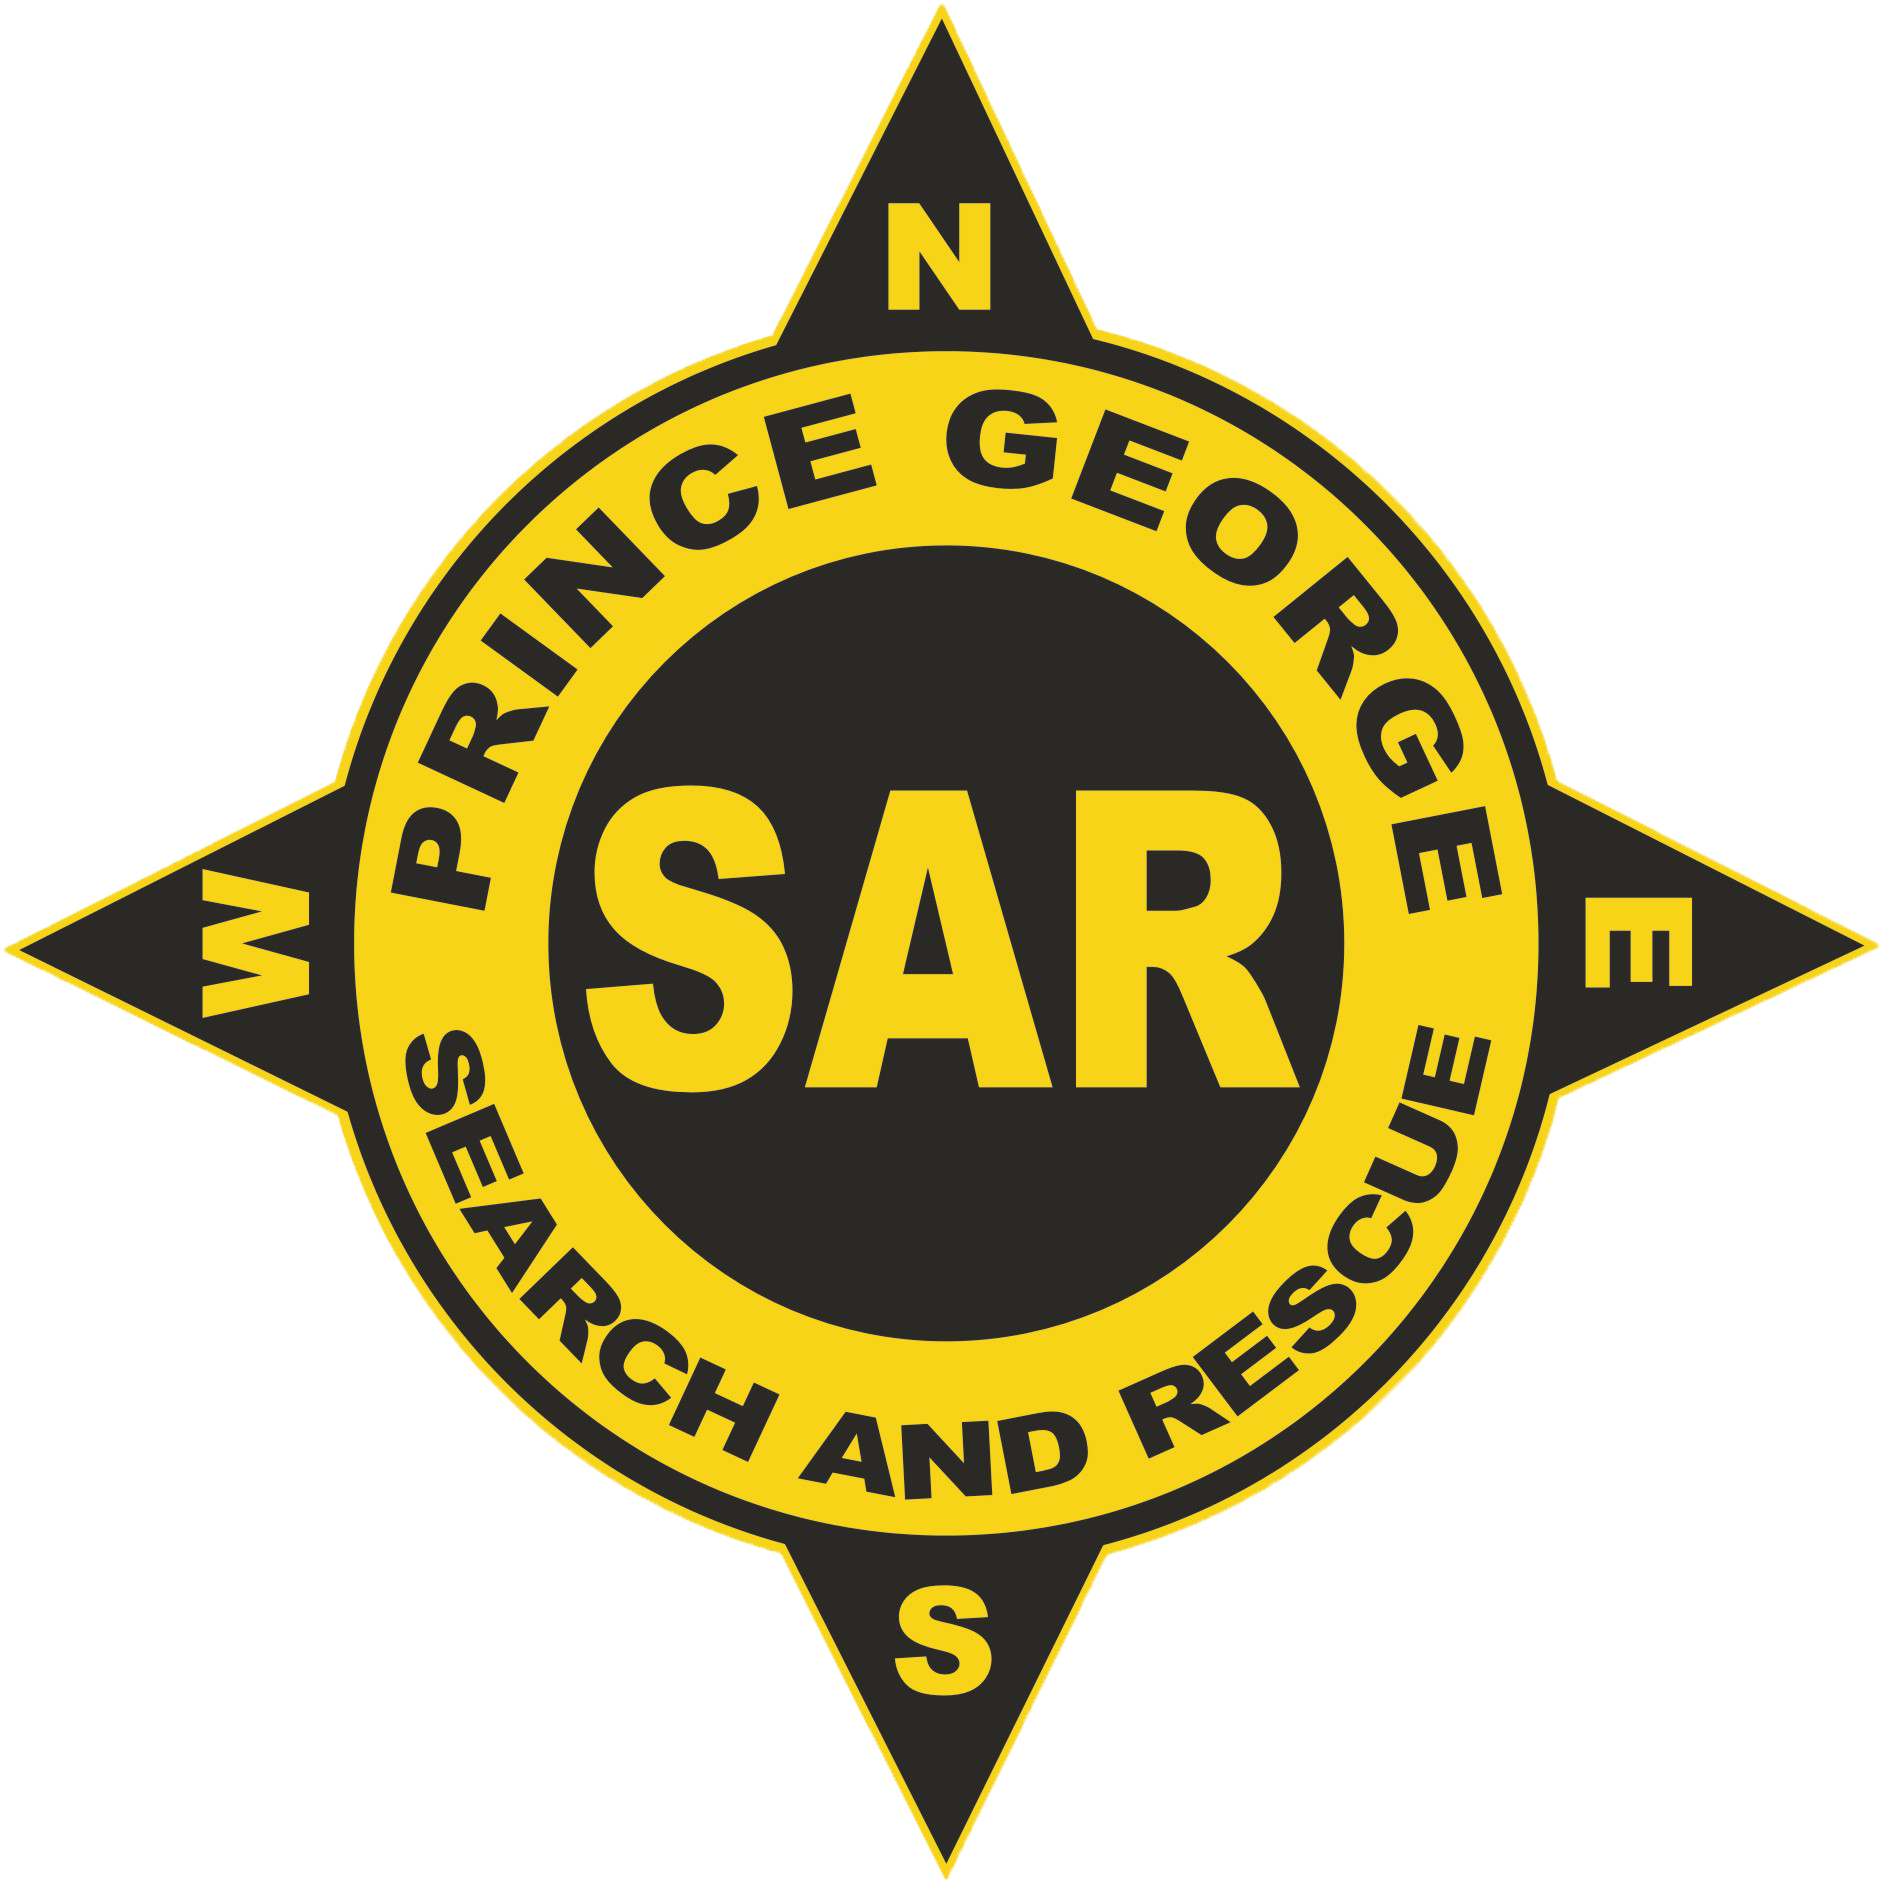 Prince George Search and Rescue